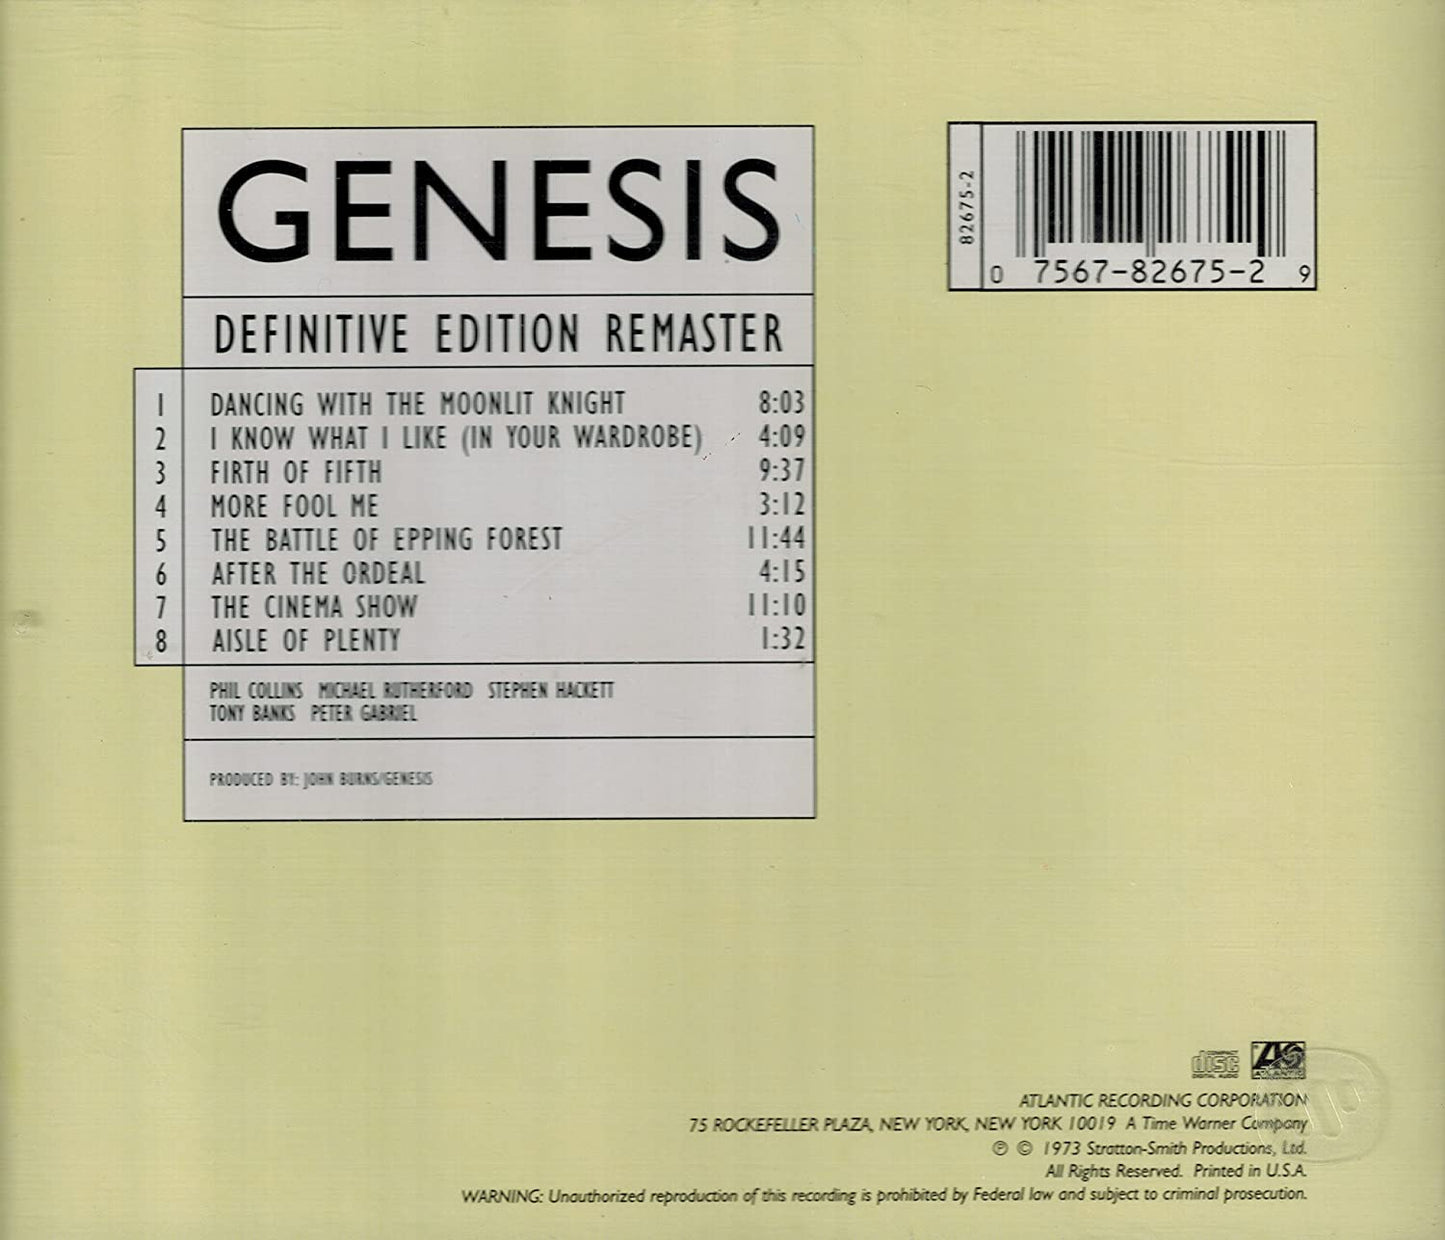 Genesis/Selling England By The Pound [CD]